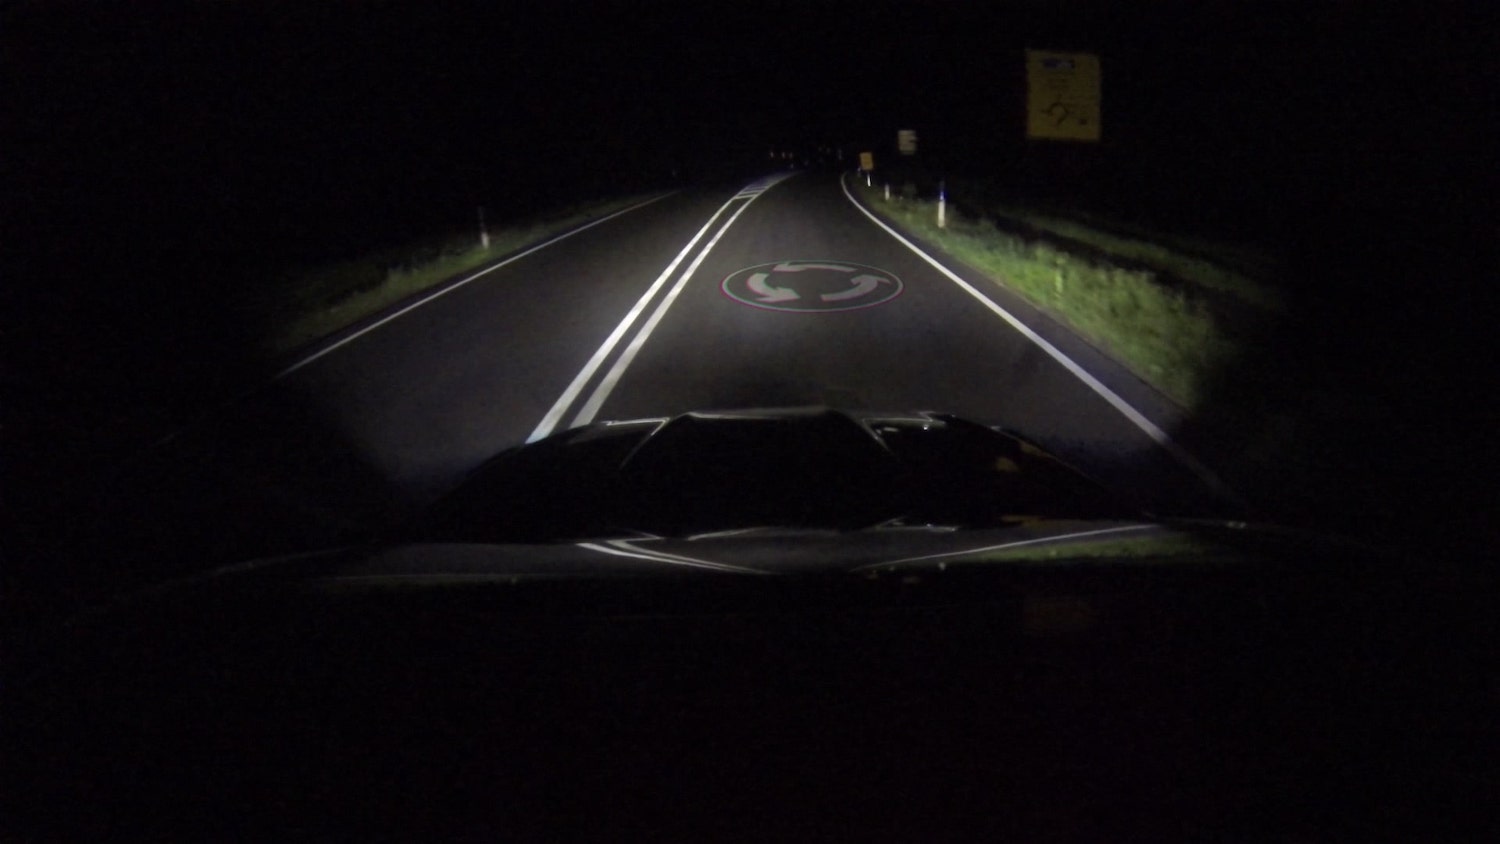 Bygger filosof lugt Ford Headlight Tech Projects Images Onto Roads For Drivers